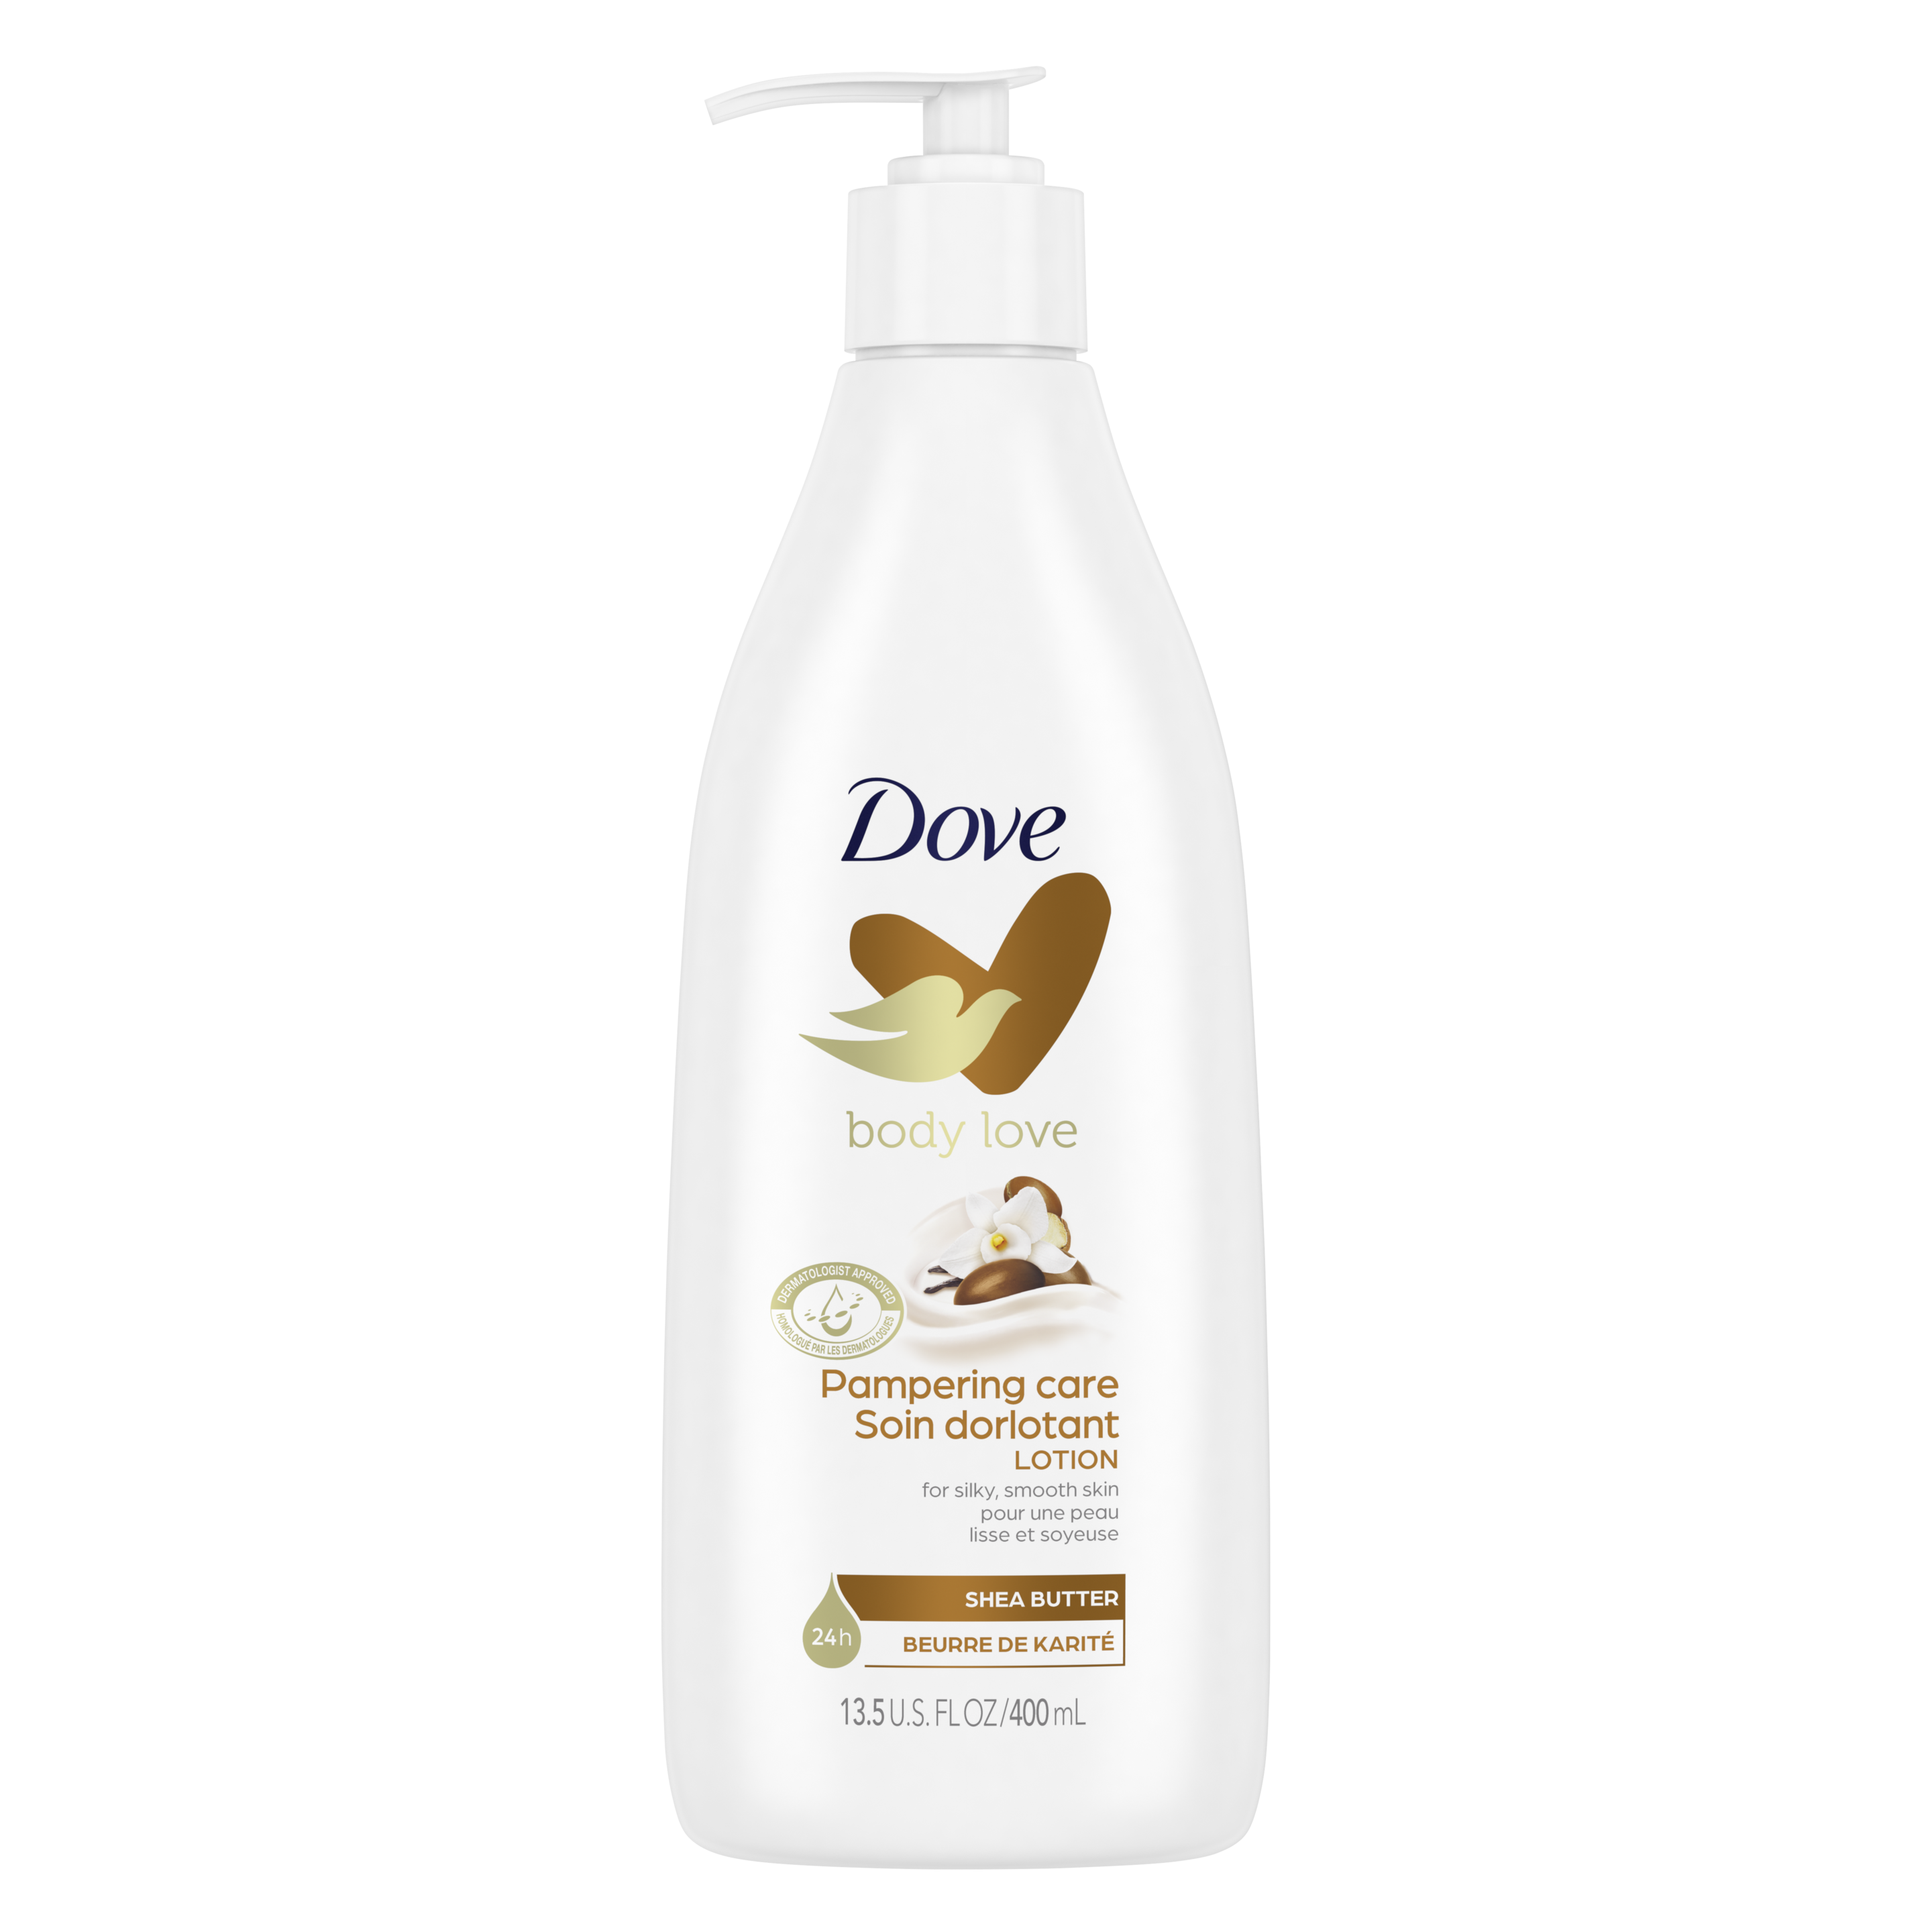 lineair Consulaat Rot Body Love Pampering Care Body Lotion | Dove